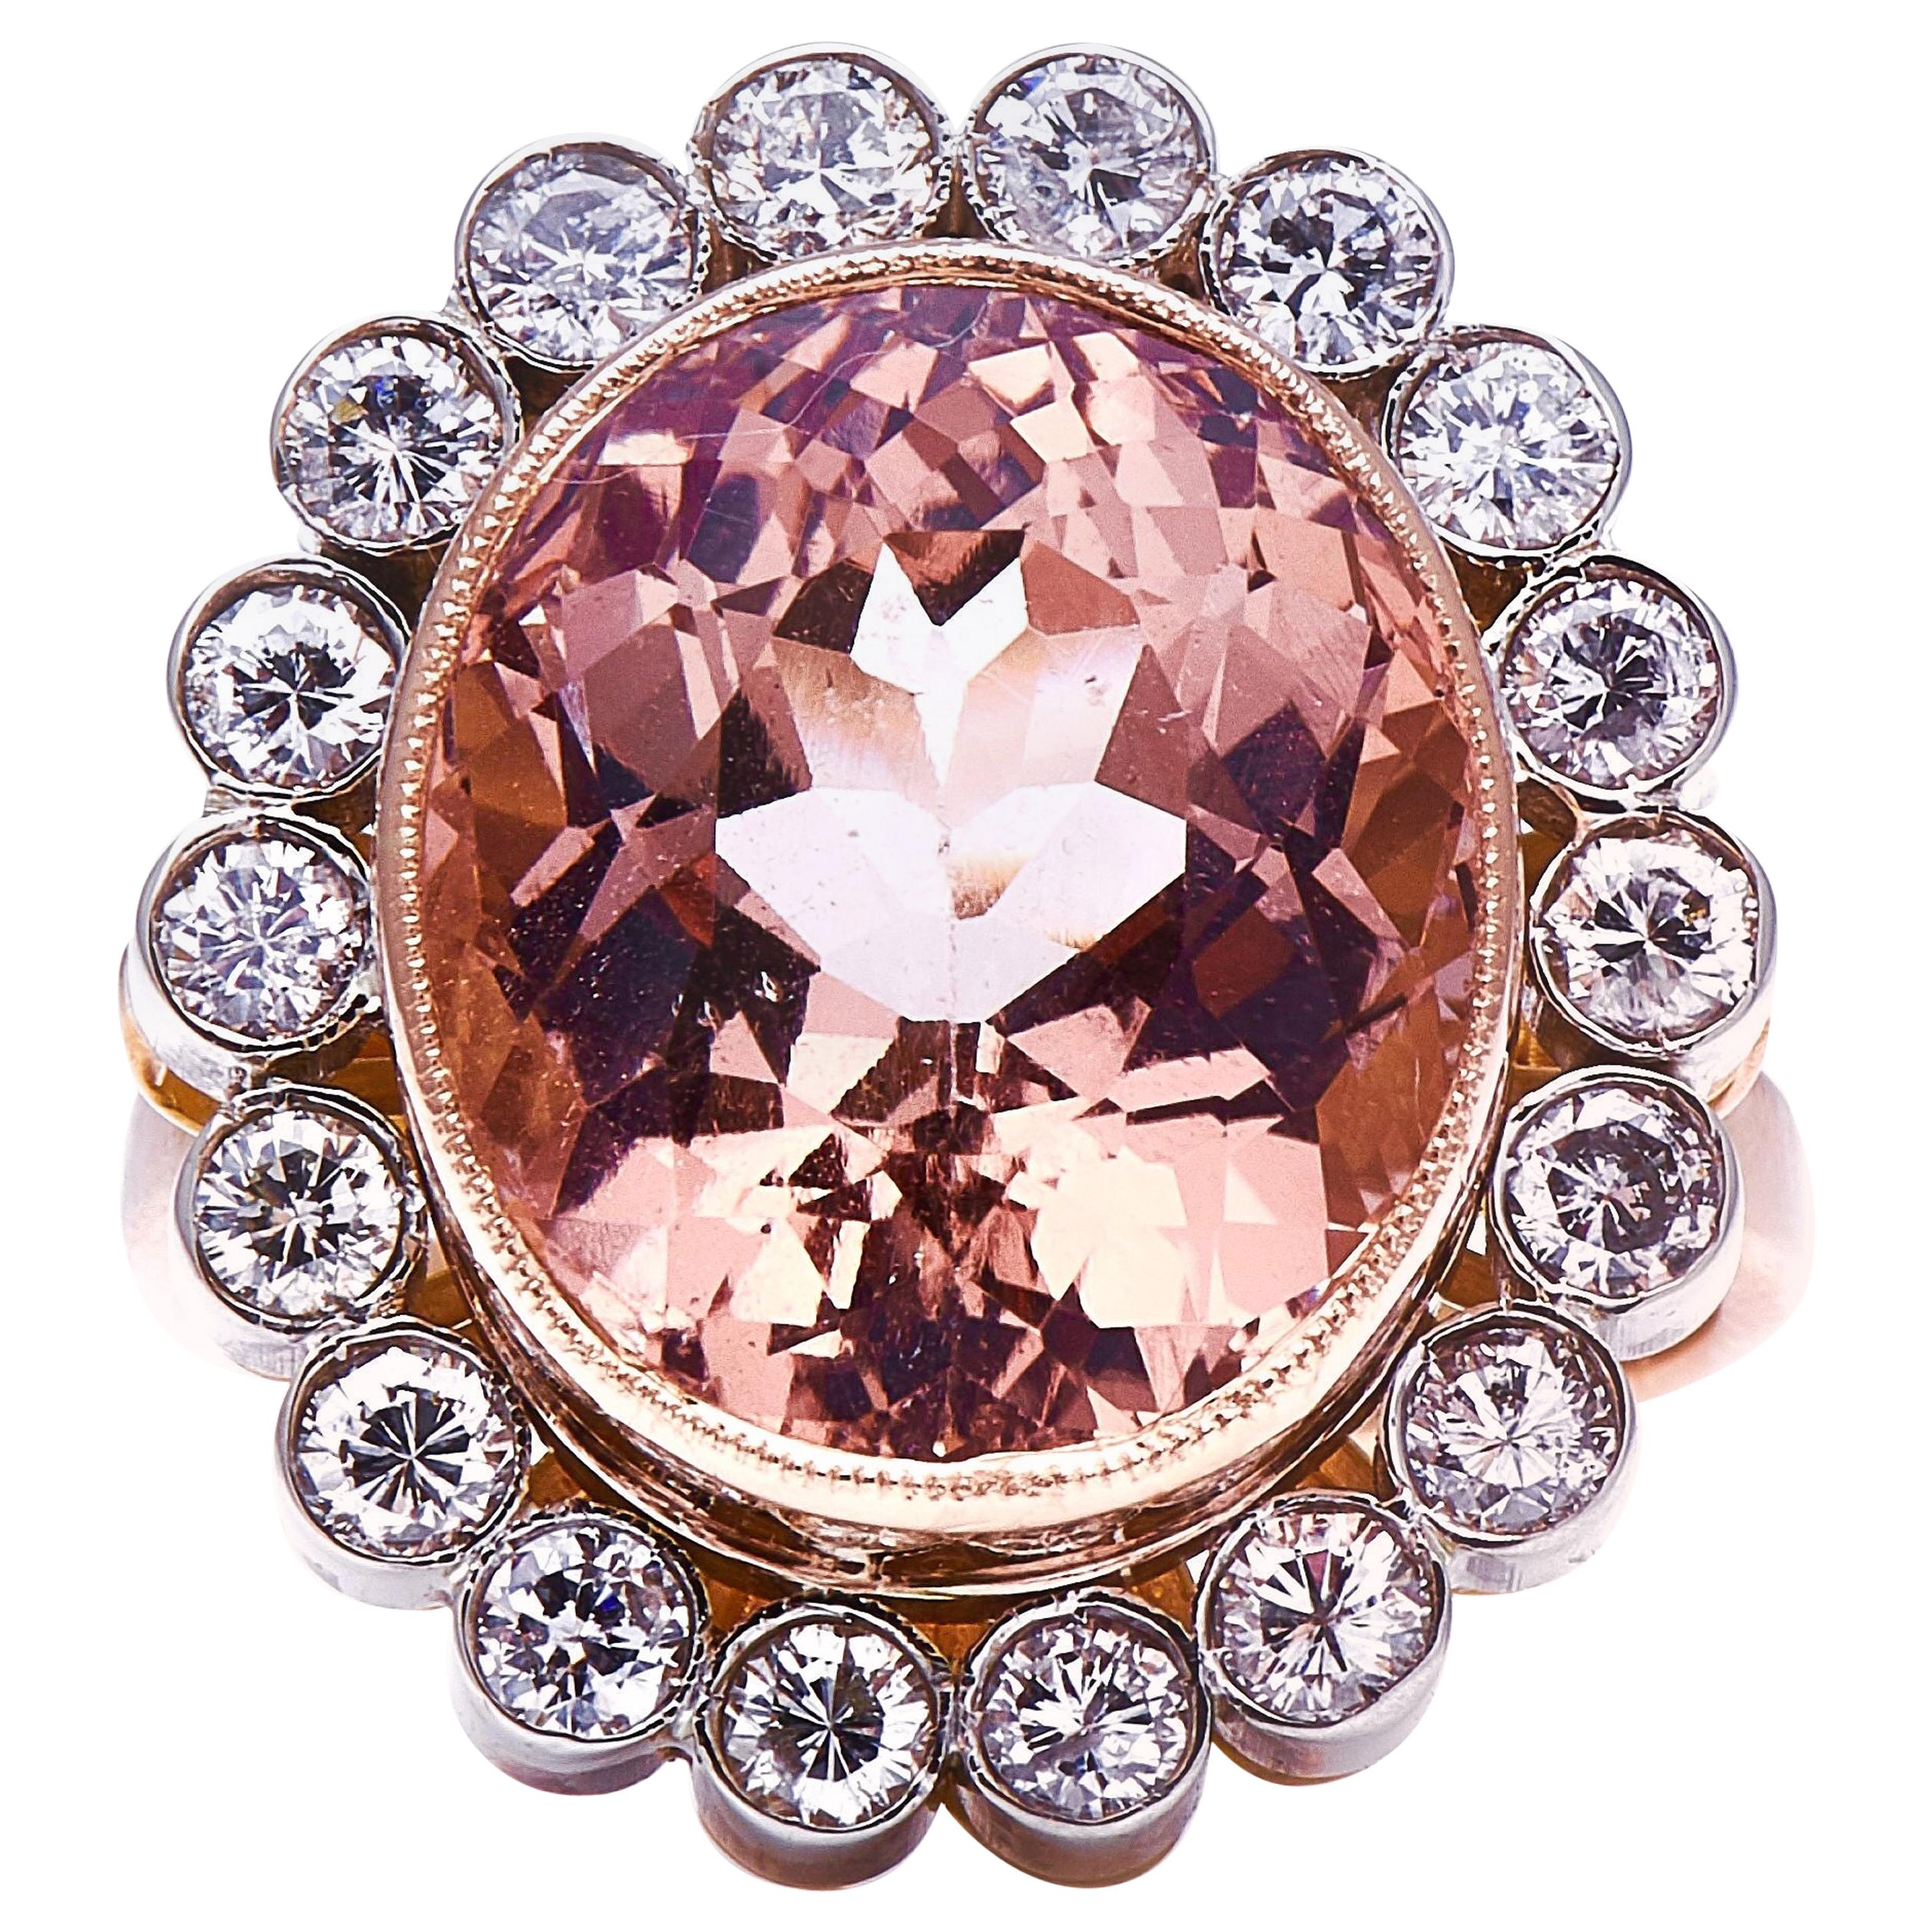 Incredible Midcentury 1950s French 18 Carat Rose Gold Morganite and Diamond Ring